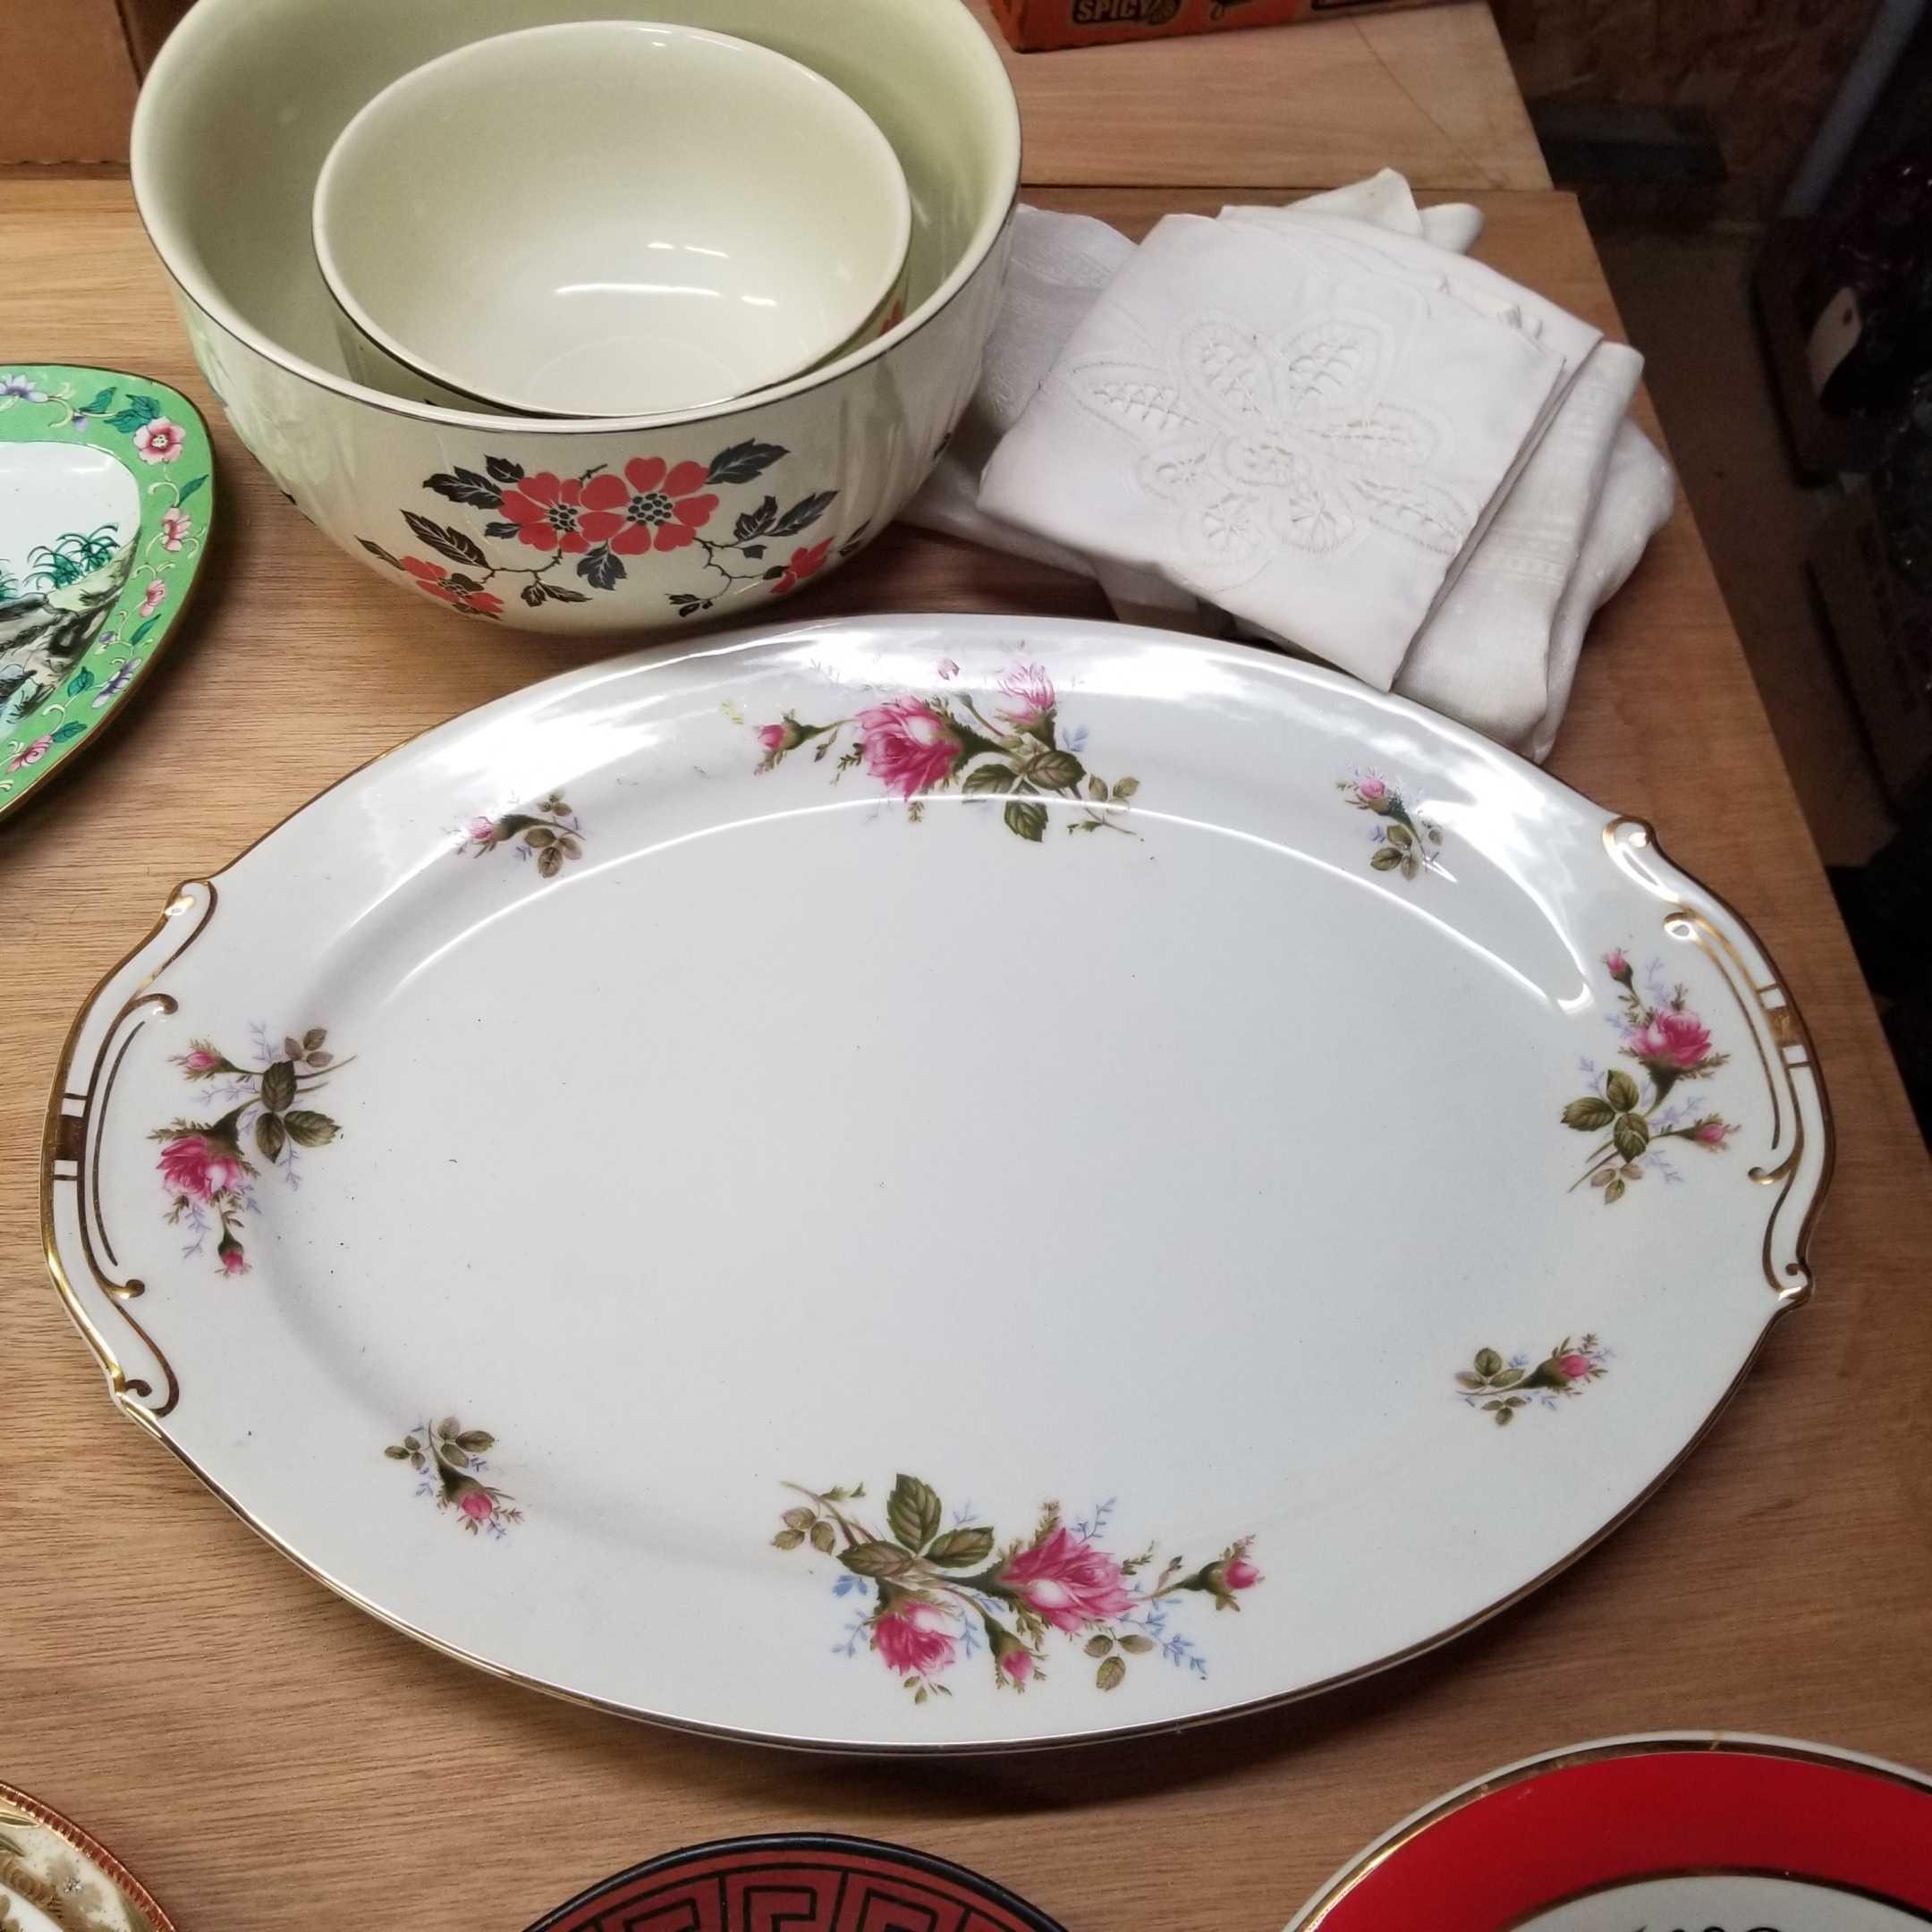 VINTAGE PLATE and BOWL ASSORTMENT